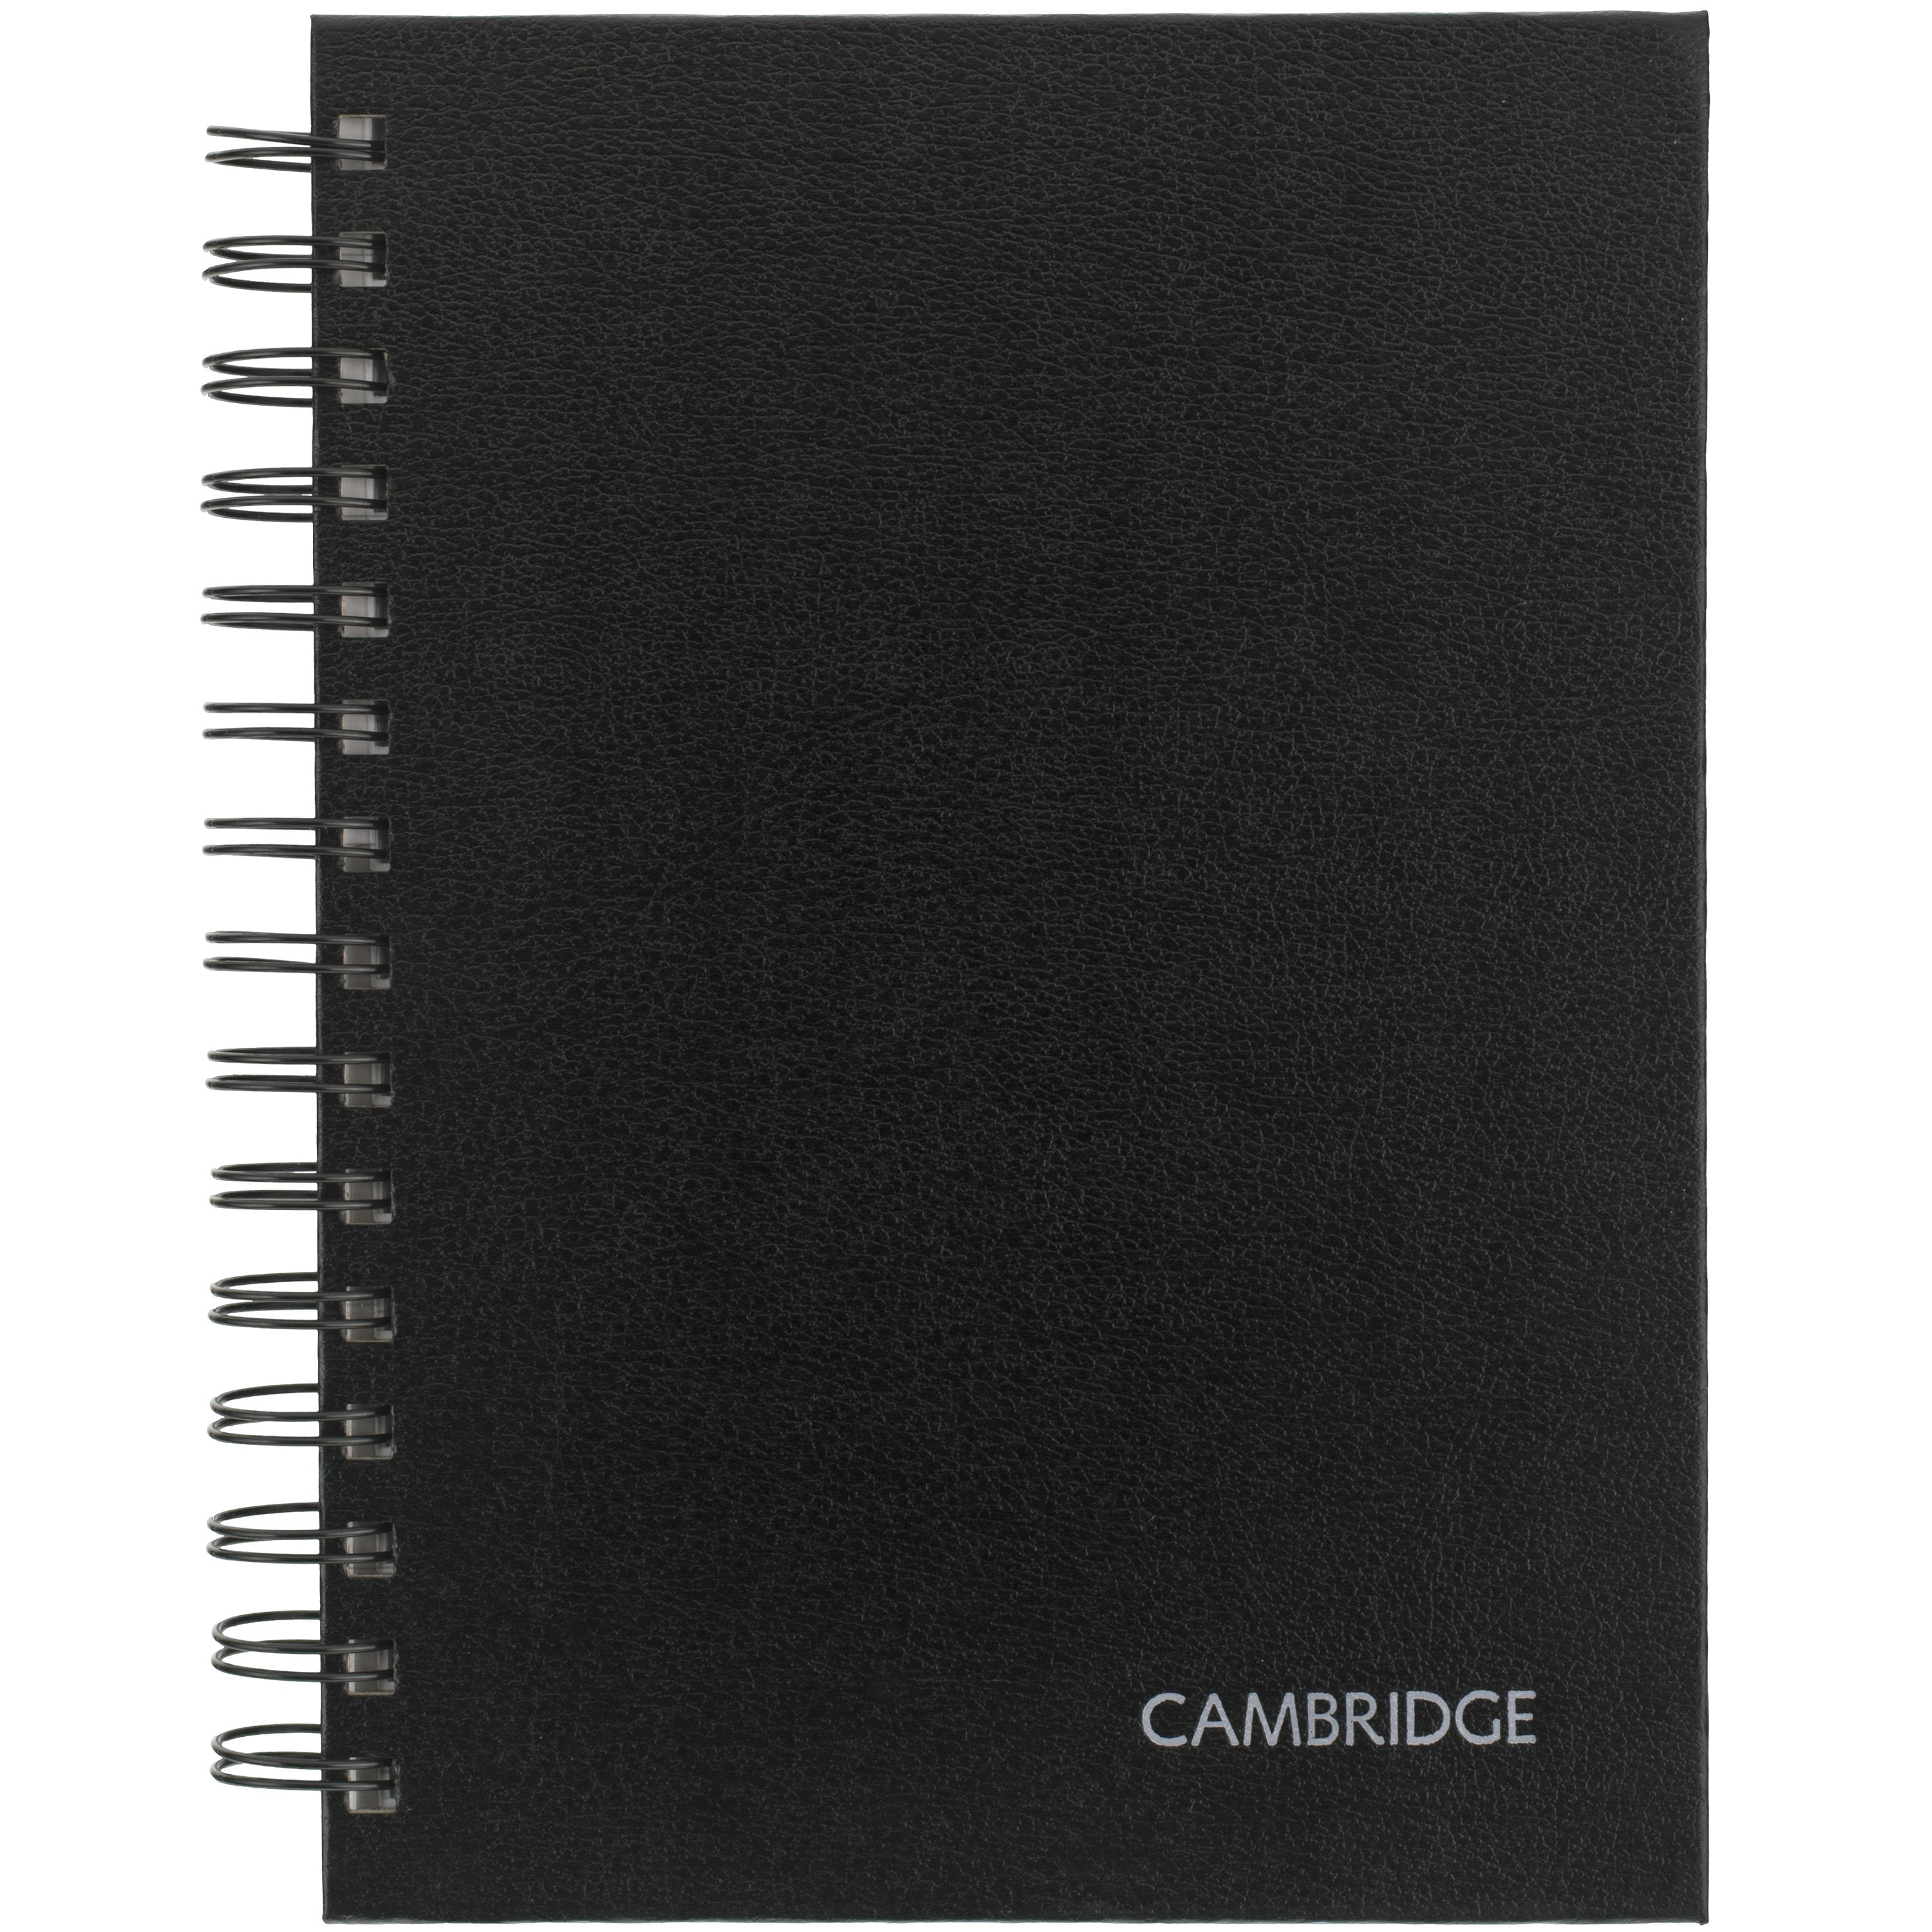 Cambridge Limited Hardcover Business Writing Notebook, 5" x 8", Medium, Black, 80 Sheets (45332W37)